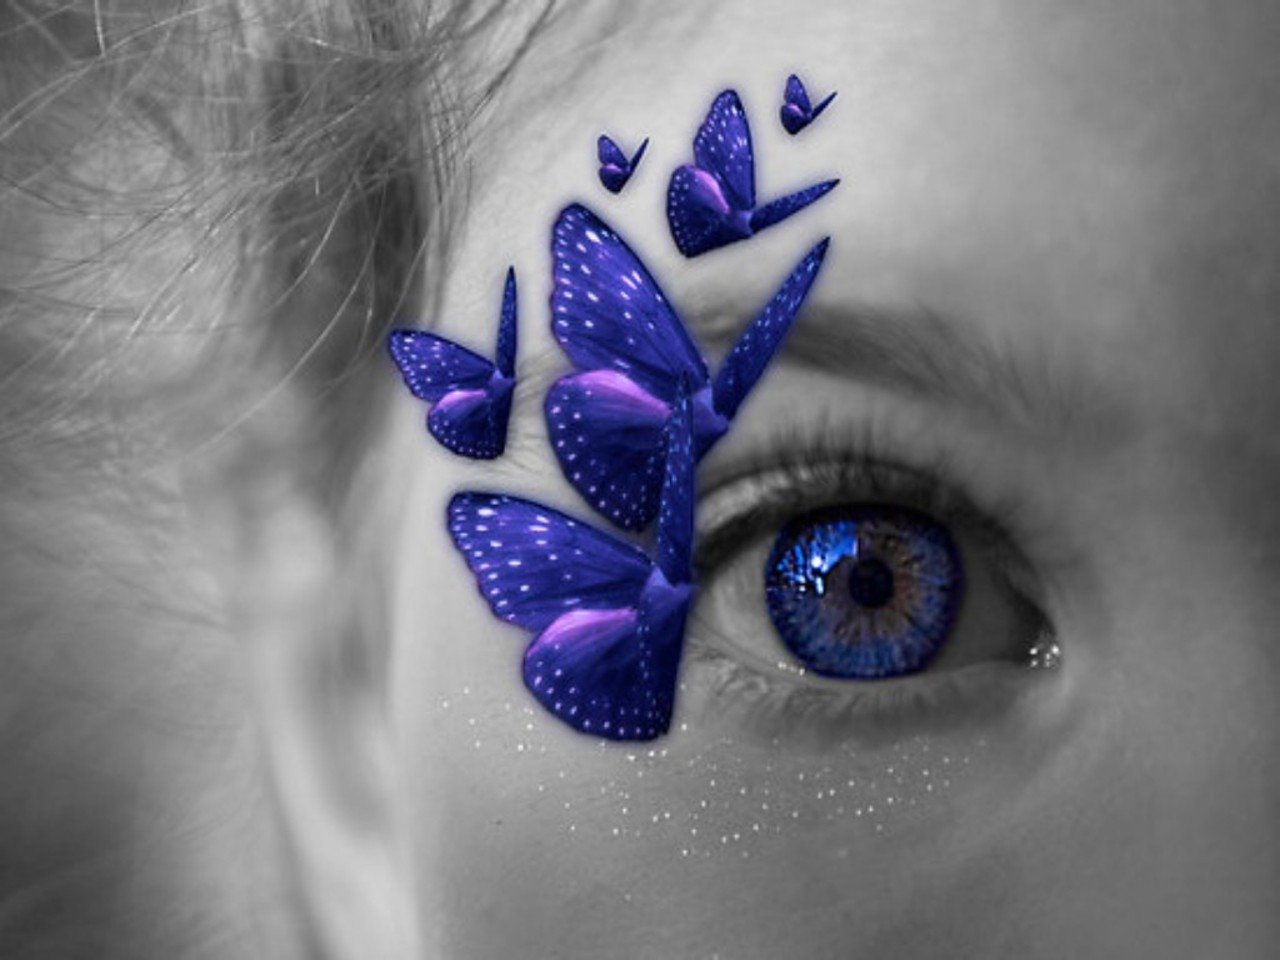 Butterfly Kisses Artistic Eye Butterfly Image. 